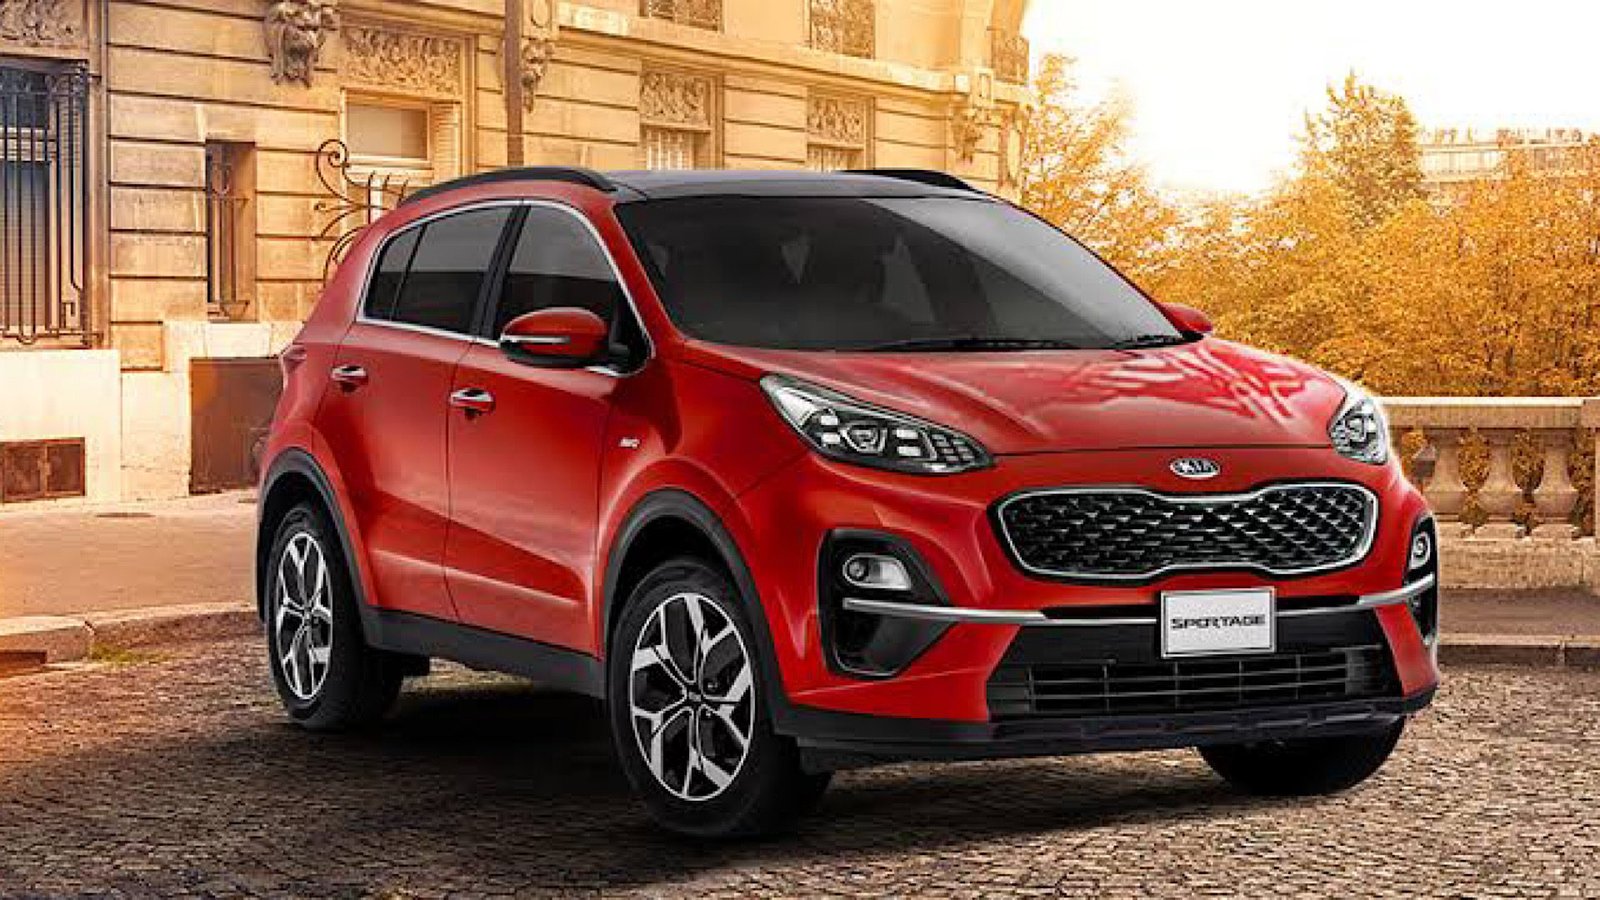 Kia responds to Sportage price reduction questions